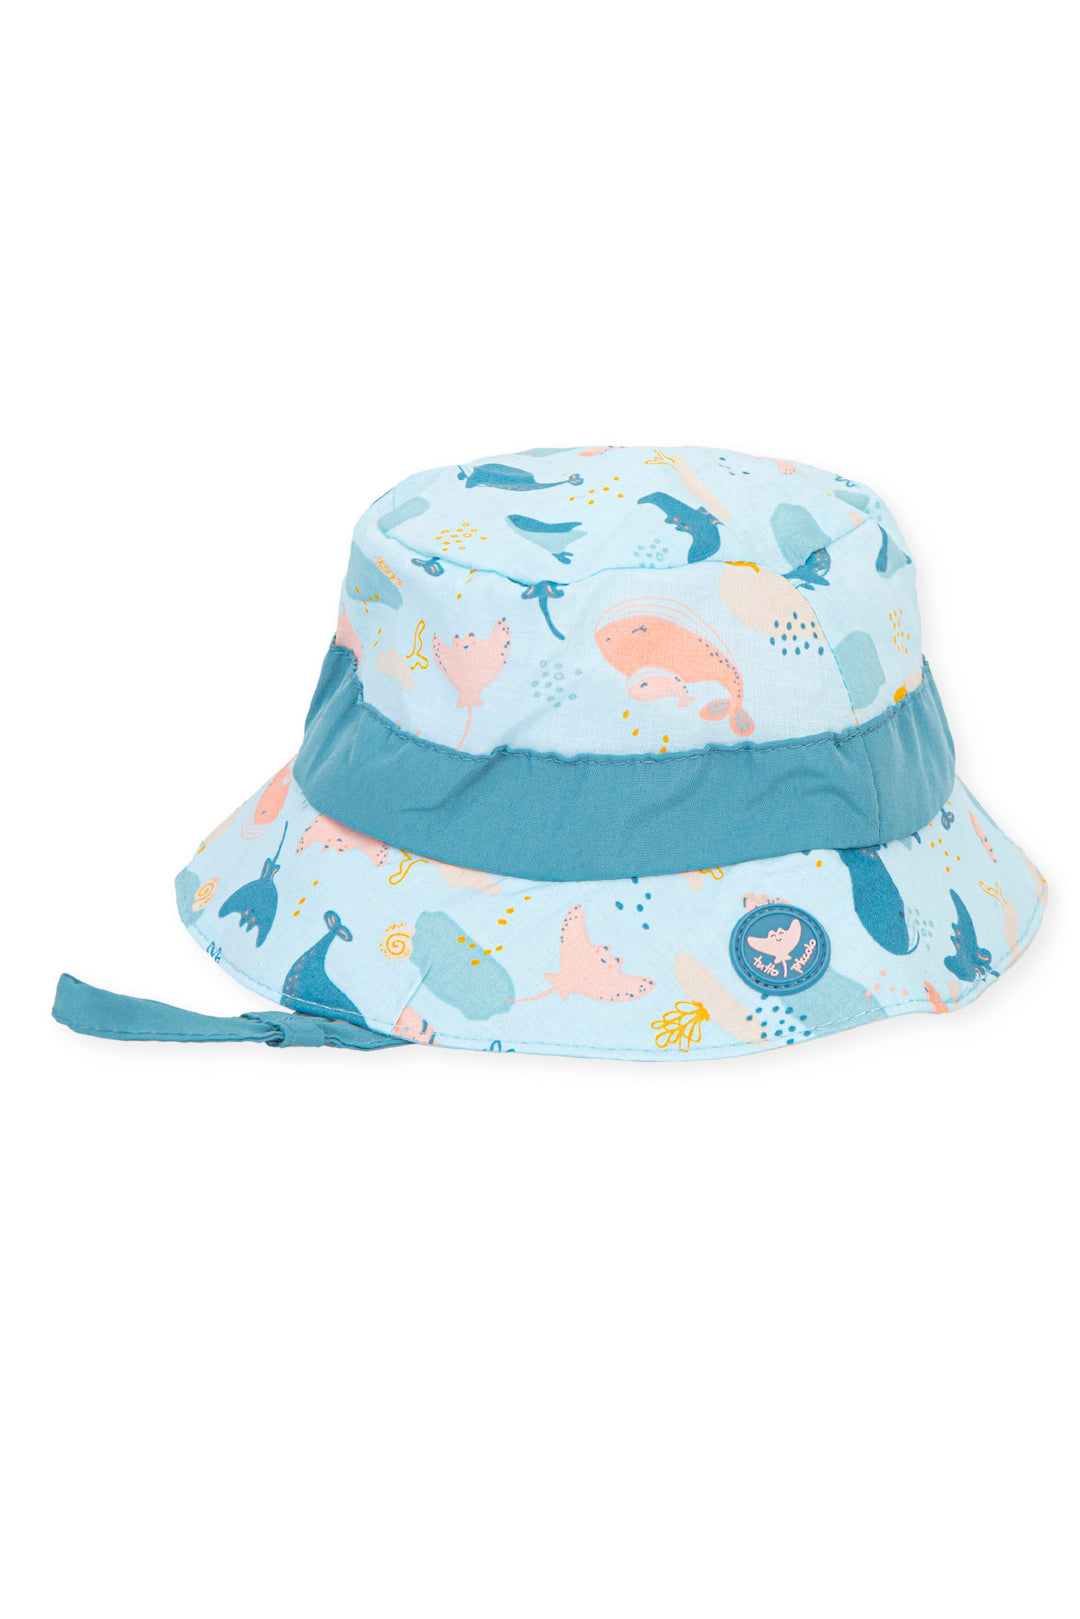 Tutto Piccolo Blue Whale Print Sun Hat | iphoneandroidapplications